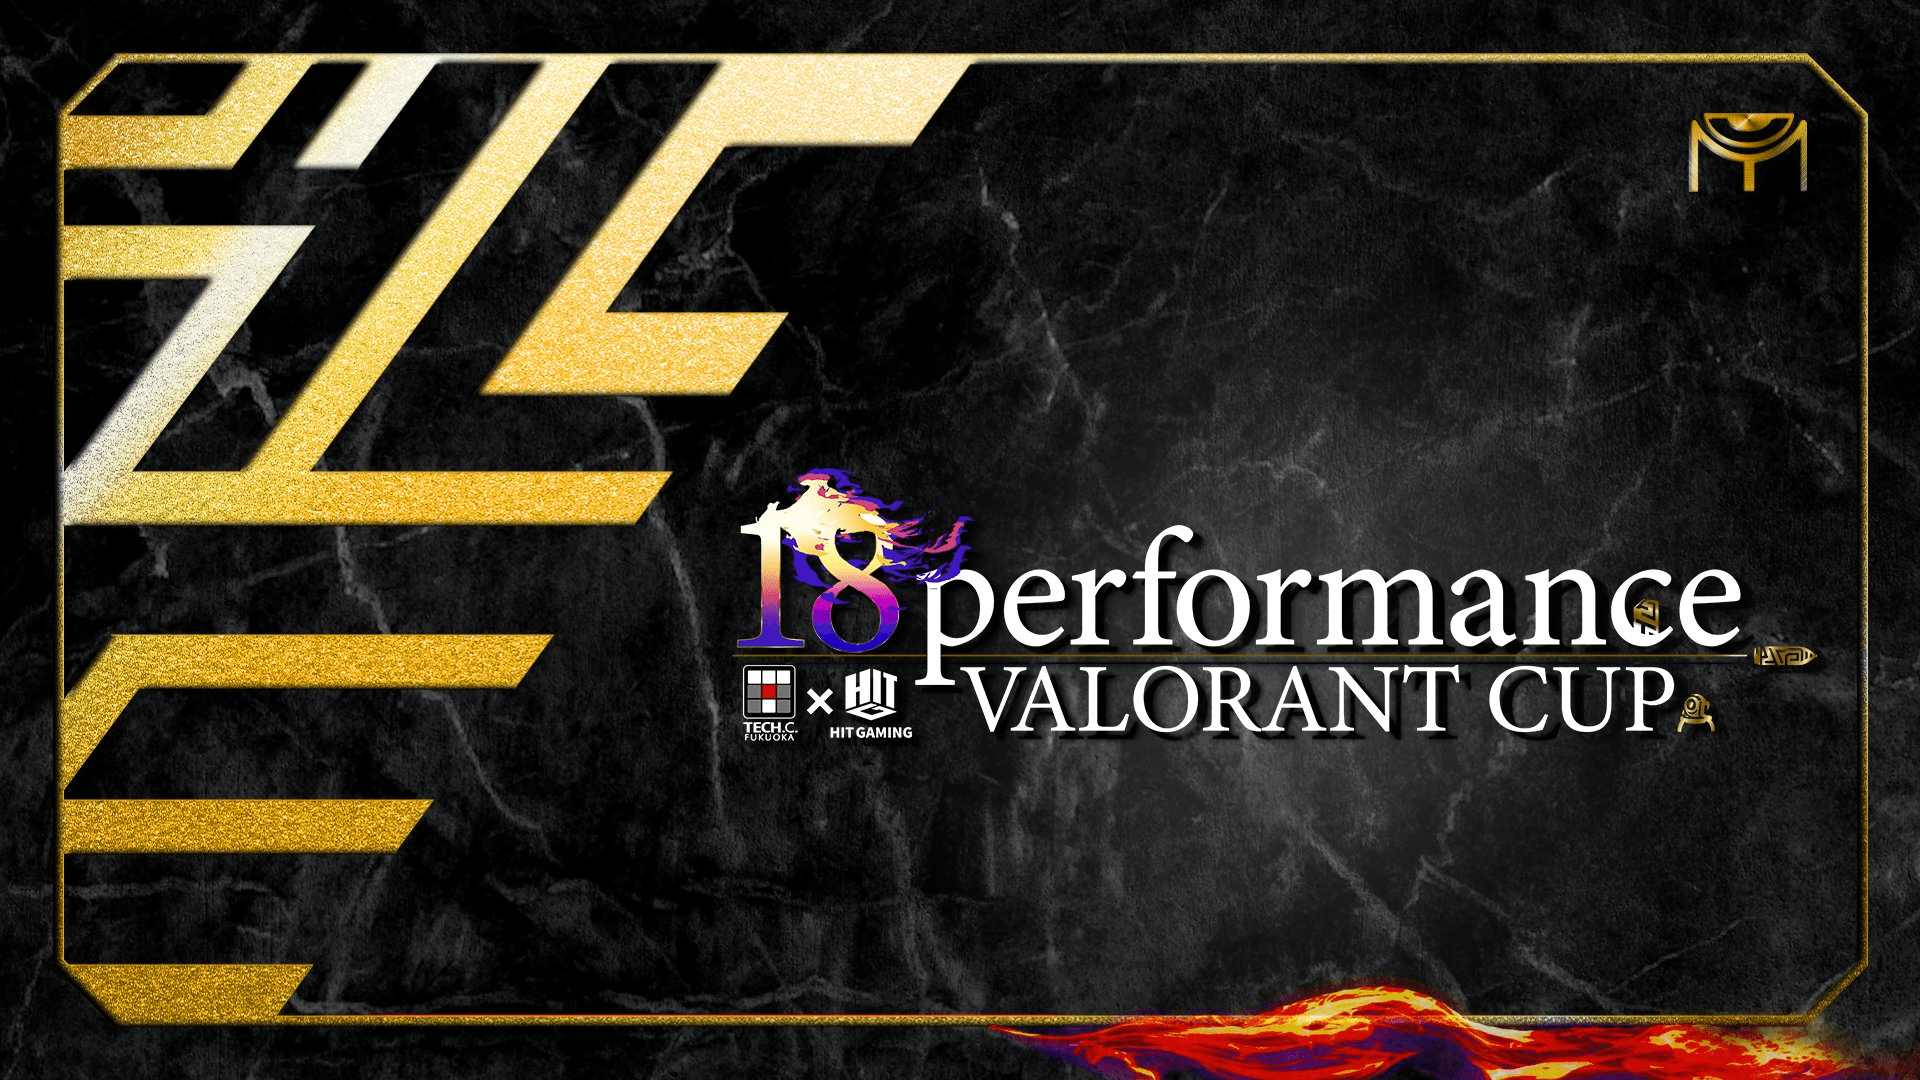  VALORANT 18 performance CUP feature image